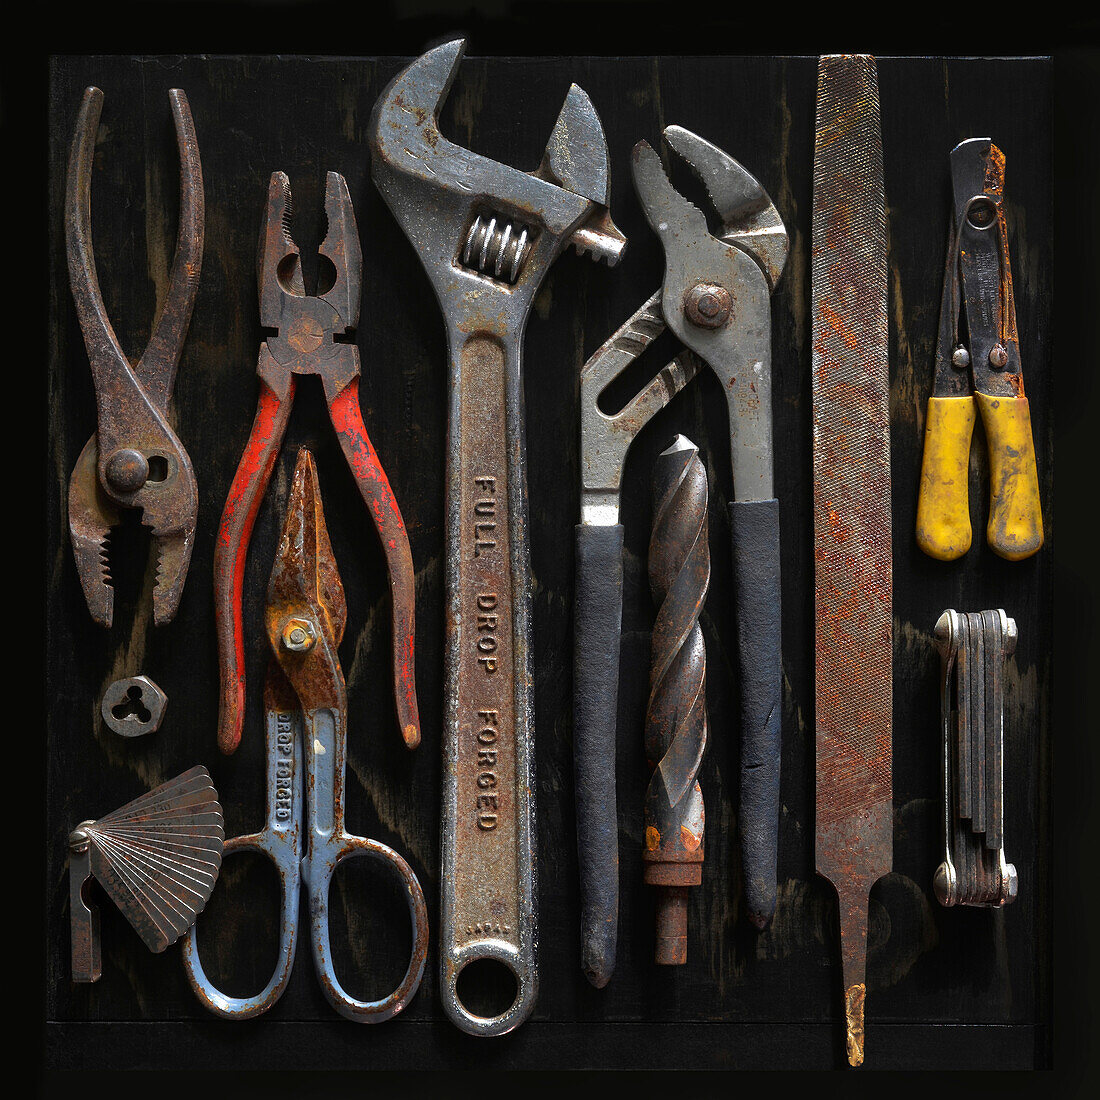 Overhead View of Assorted Old and Rusty Tools